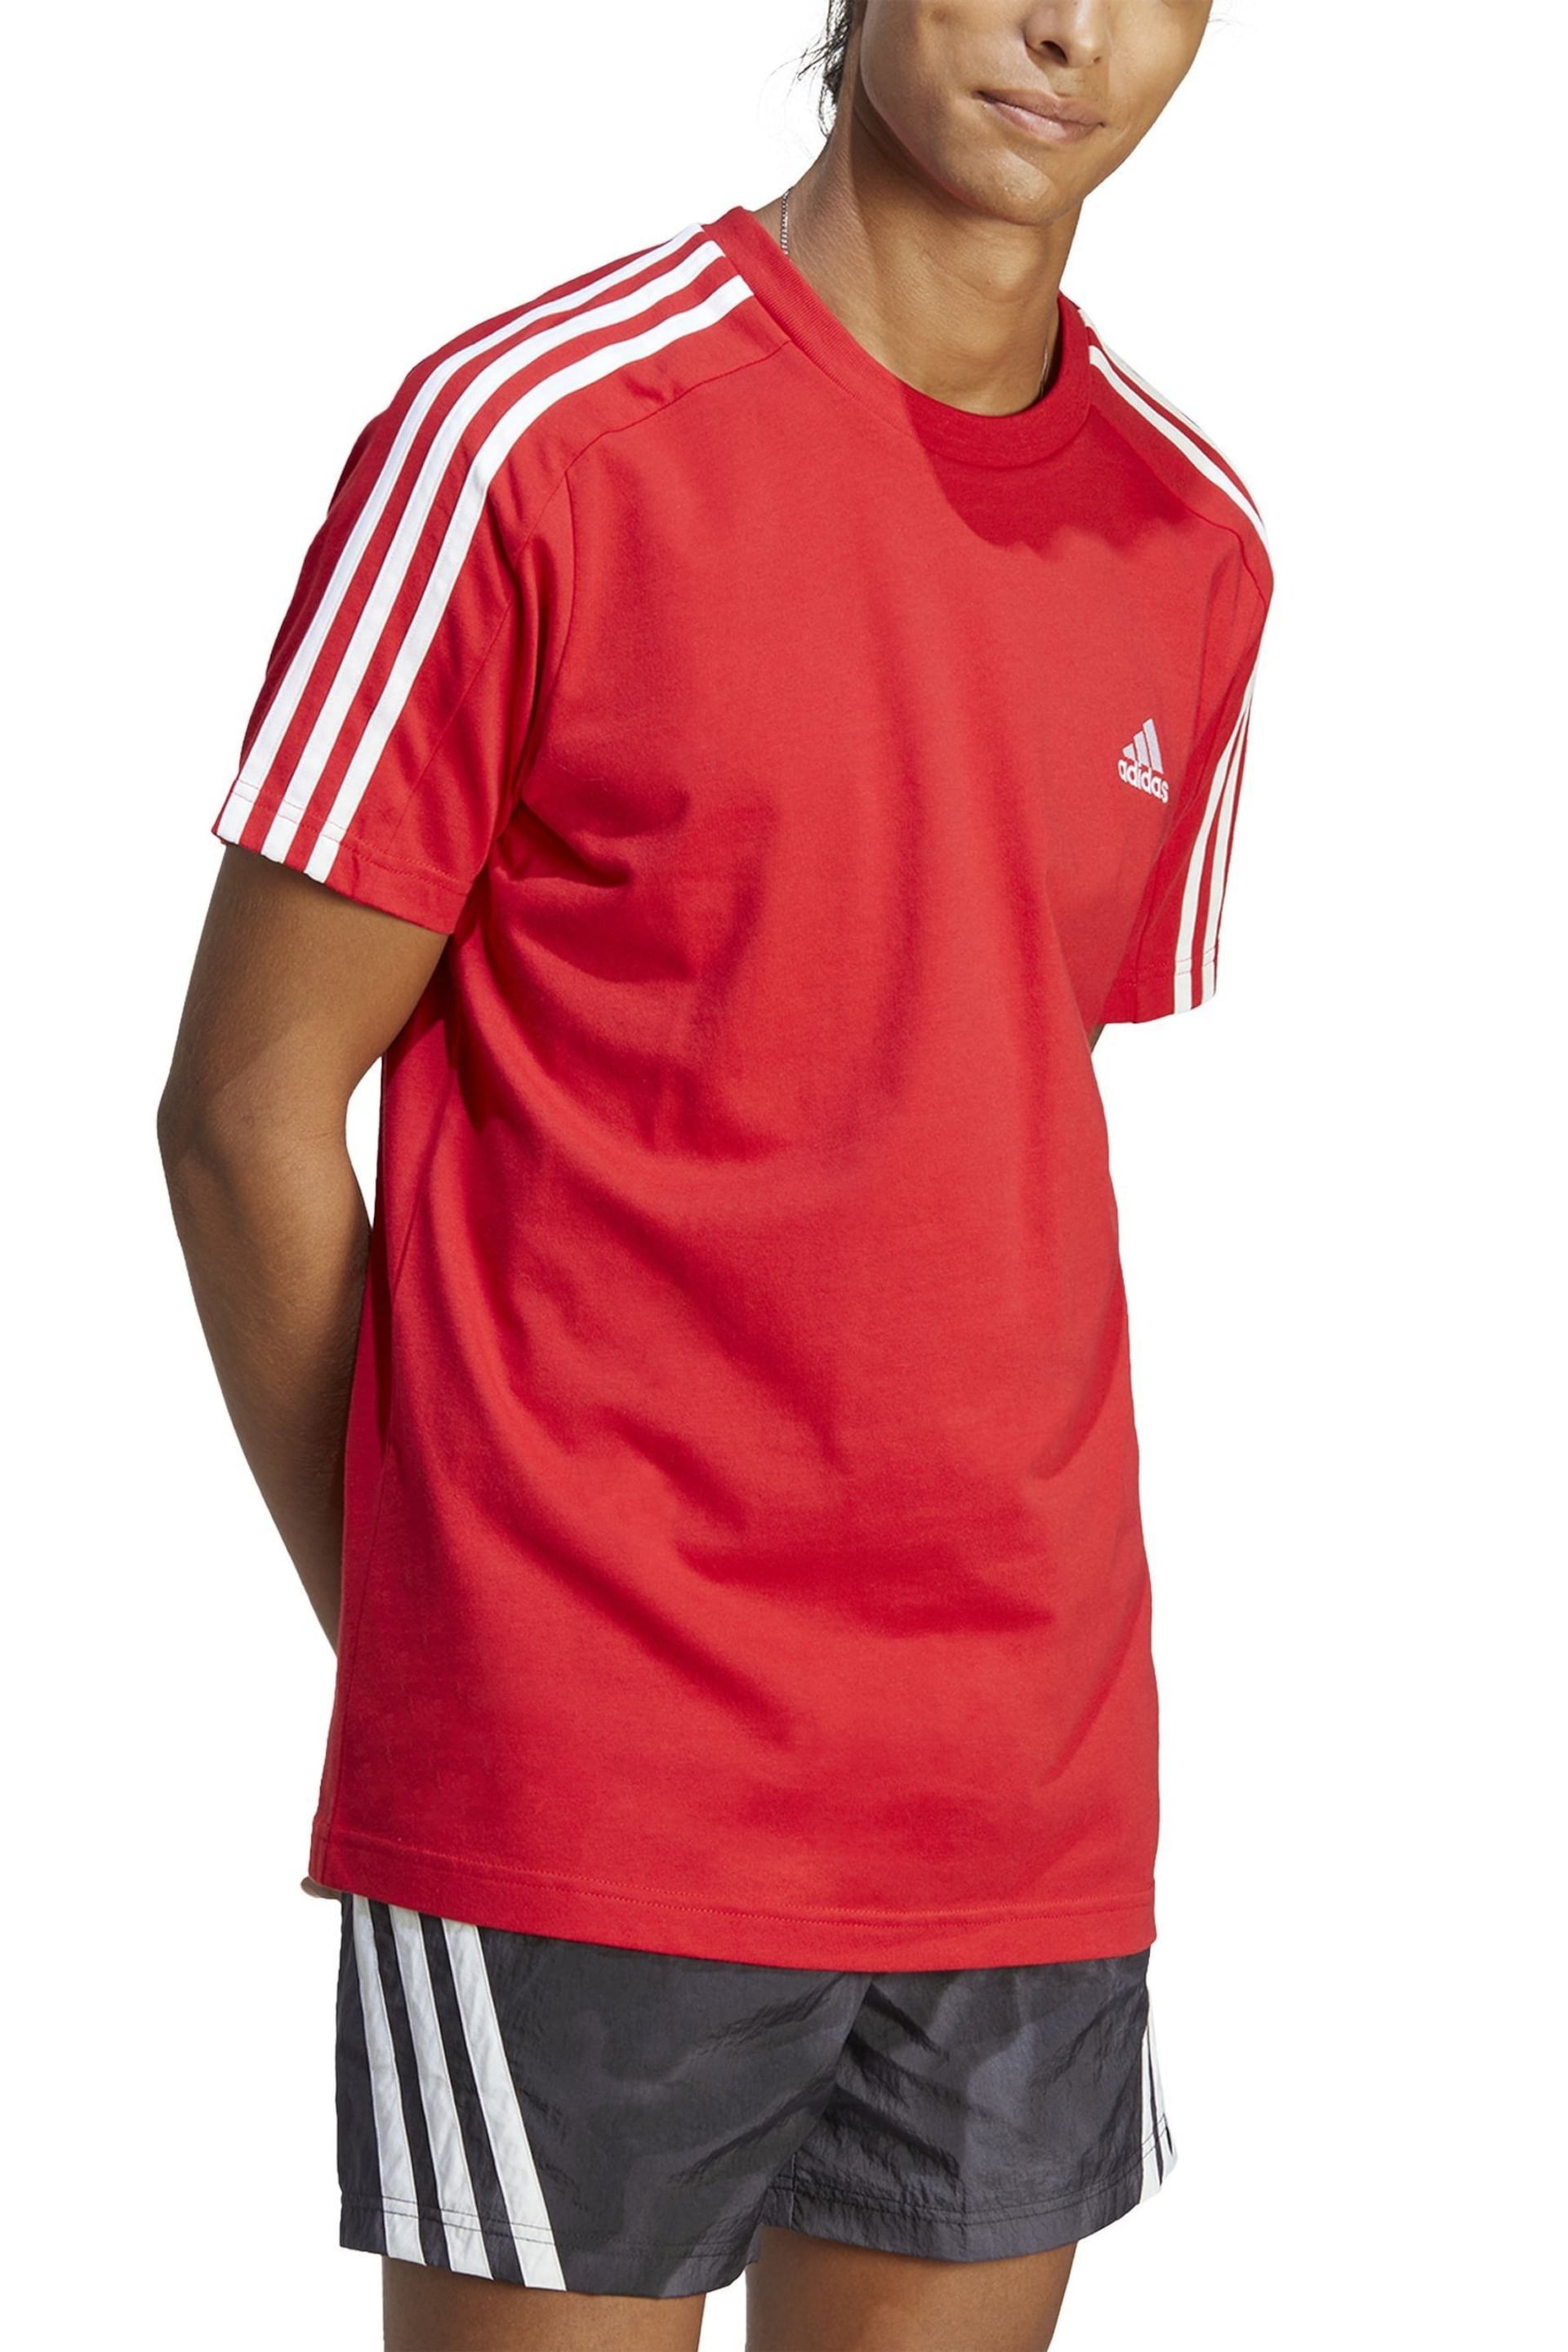 adidas Red Essentials Single Jersey 3-Stripes T-Shirt - Image 4 of 7